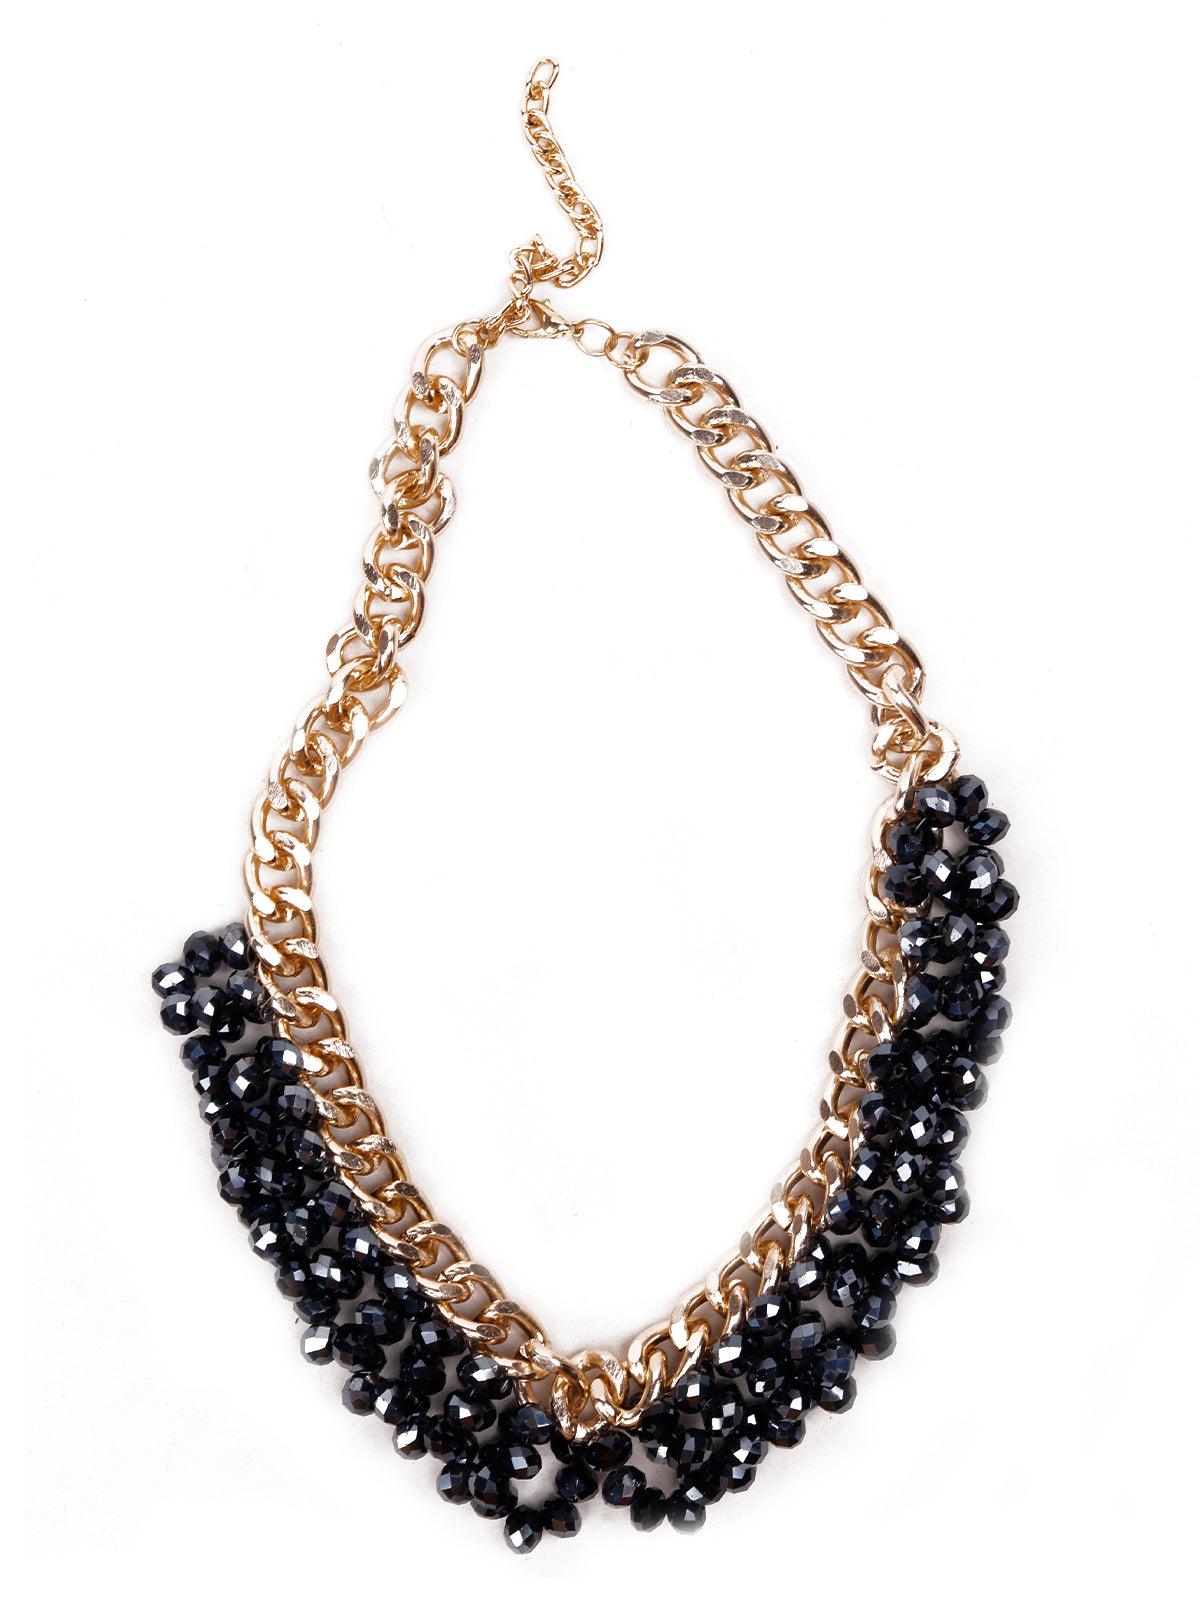 TYRA gold lightweight chunky chain necklace